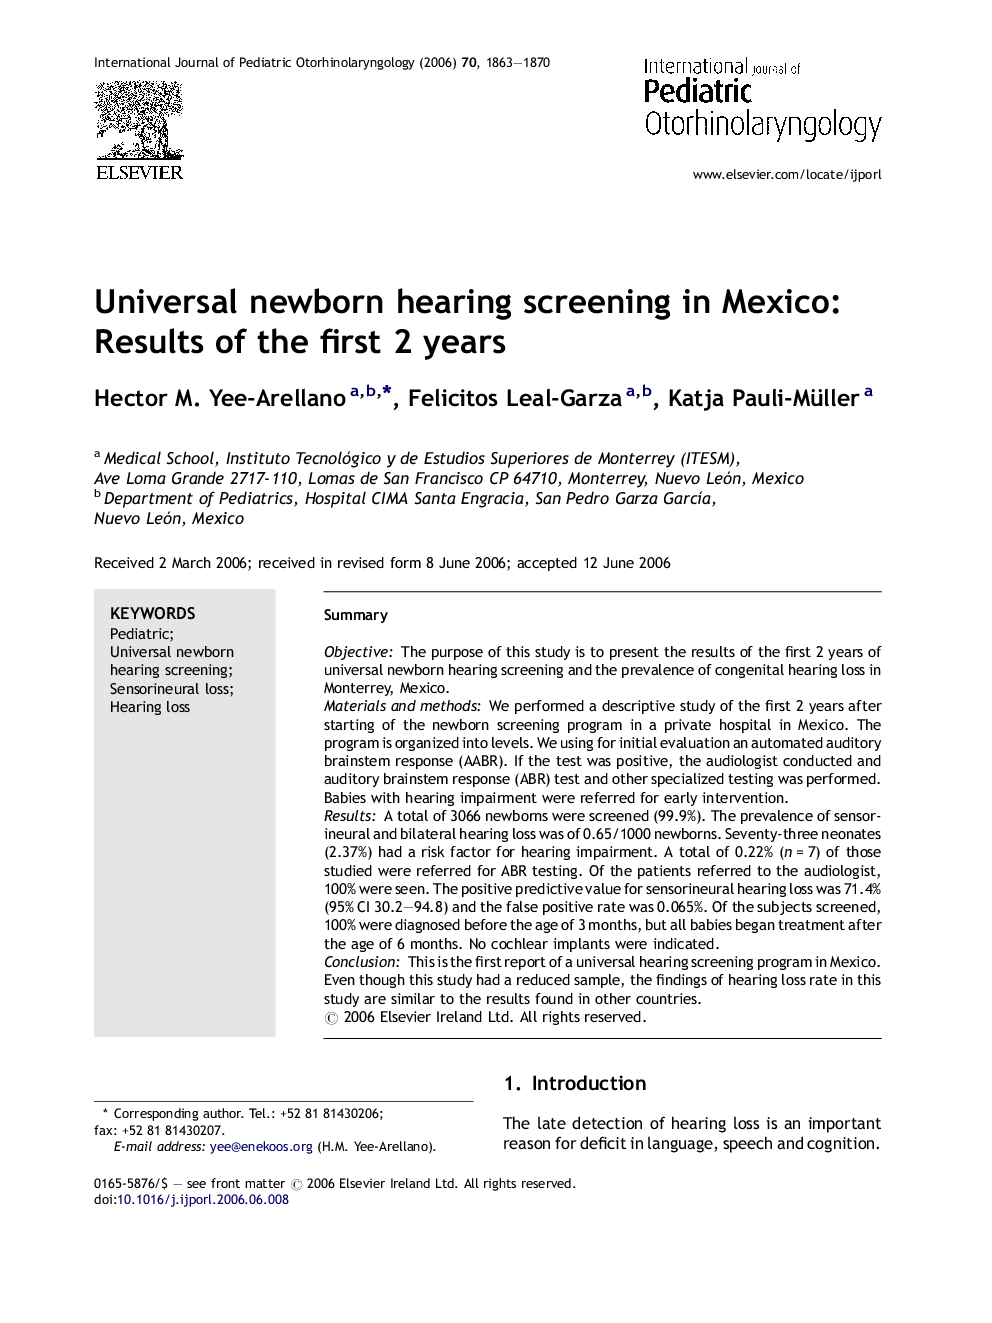 Universal newborn hearing screening in Mexico: Results of the first 2 years